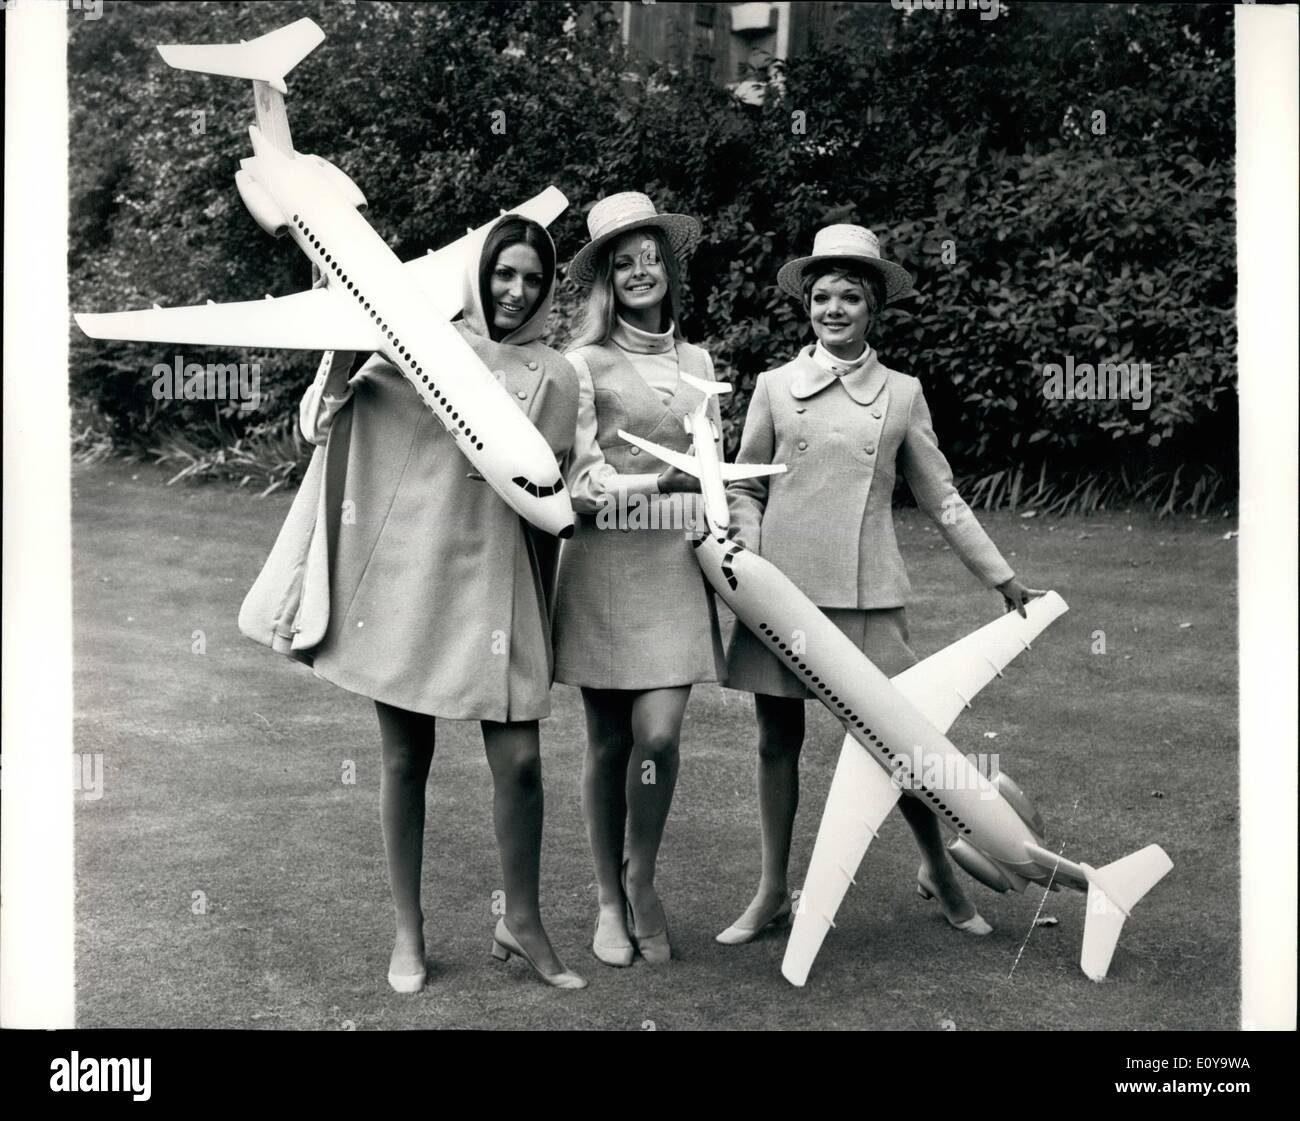 Sep. 09, 1969 - A New Airline Designed Entirely For Holidaymakers: Pink, turquoise and orange airliners, will be flying in Britain's skies next year by a British independent airline. An the hostesses will wear straw boaters and uniforms in colours to match their aircraft. This new look in the skies was revealed today at a press conference by Court Line Ltd, who are the shipping firm who own Autair International. This new airline will be the first to be designed entirely for holidaymakers and will concentrate solely on holiday charter flights Stock Photo